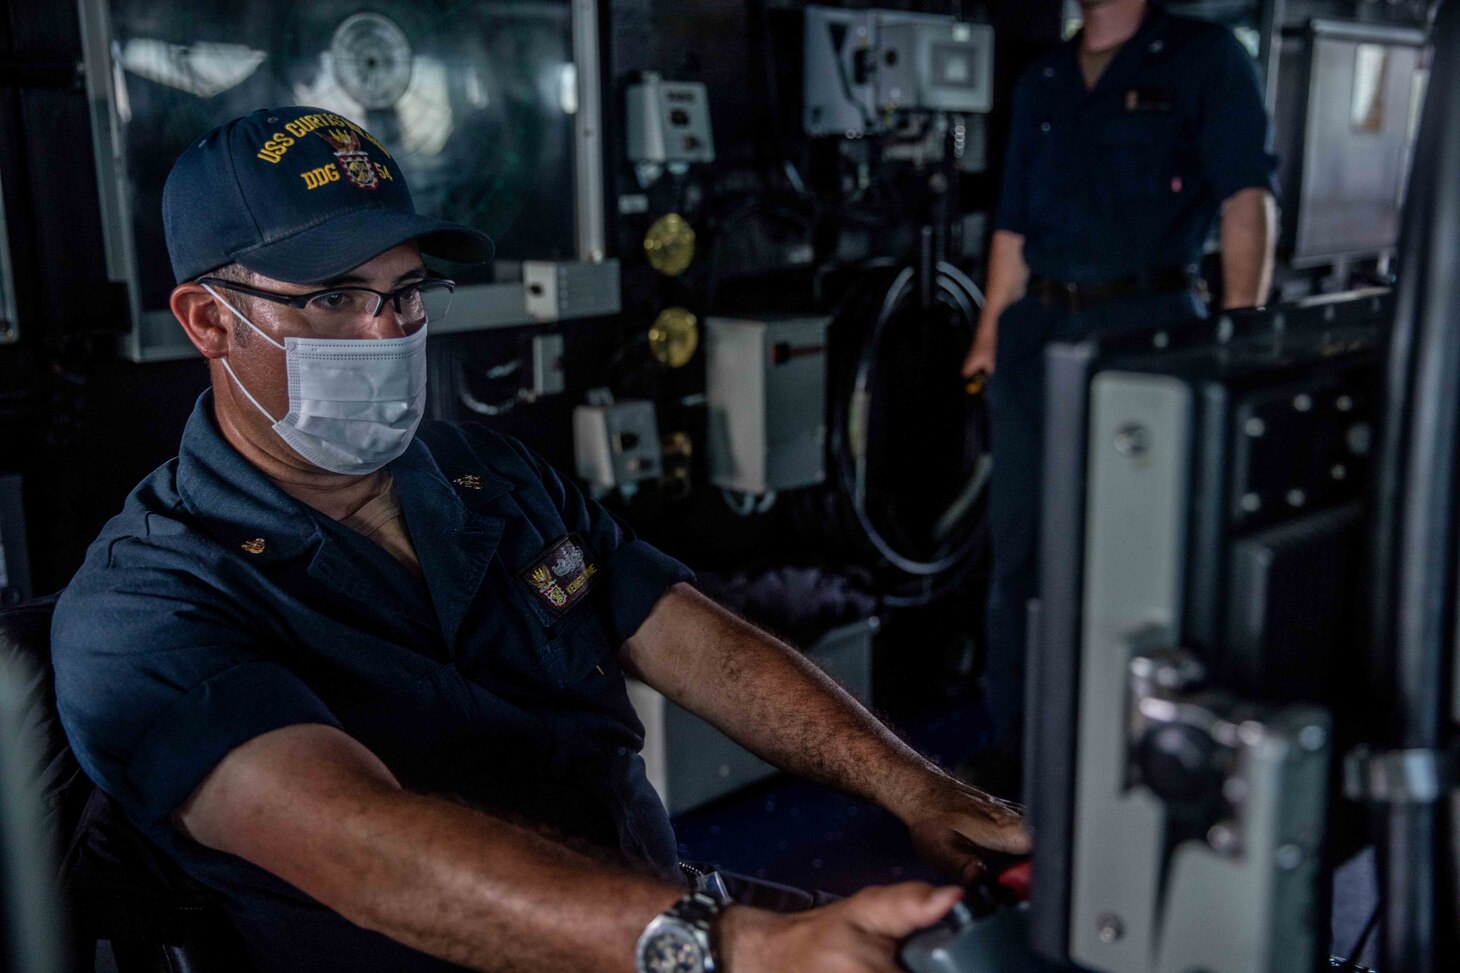 TAIWAN STRAIT (May 18, 2021) – Senior Chief Sonar Technician (Surface) Kenneth Dunne, from Fort Lauderdale, Fla., stands watch on the bridge of the Arleigh Burke-class guided-missile destroyer USS Curtis Wilbur (DDG 54) as the ship conducts routine operations. Curtis Wilbur is assigned to Commander, Task Force 71/Destroyer Squadron (DESRON) 15, the Navy’s largest forward DESRON and the U.S. 7th Fleet’s principal surface force. (U.S. Navy photo by Mass Communication Specialist 3rd Class Zenaida Roth)